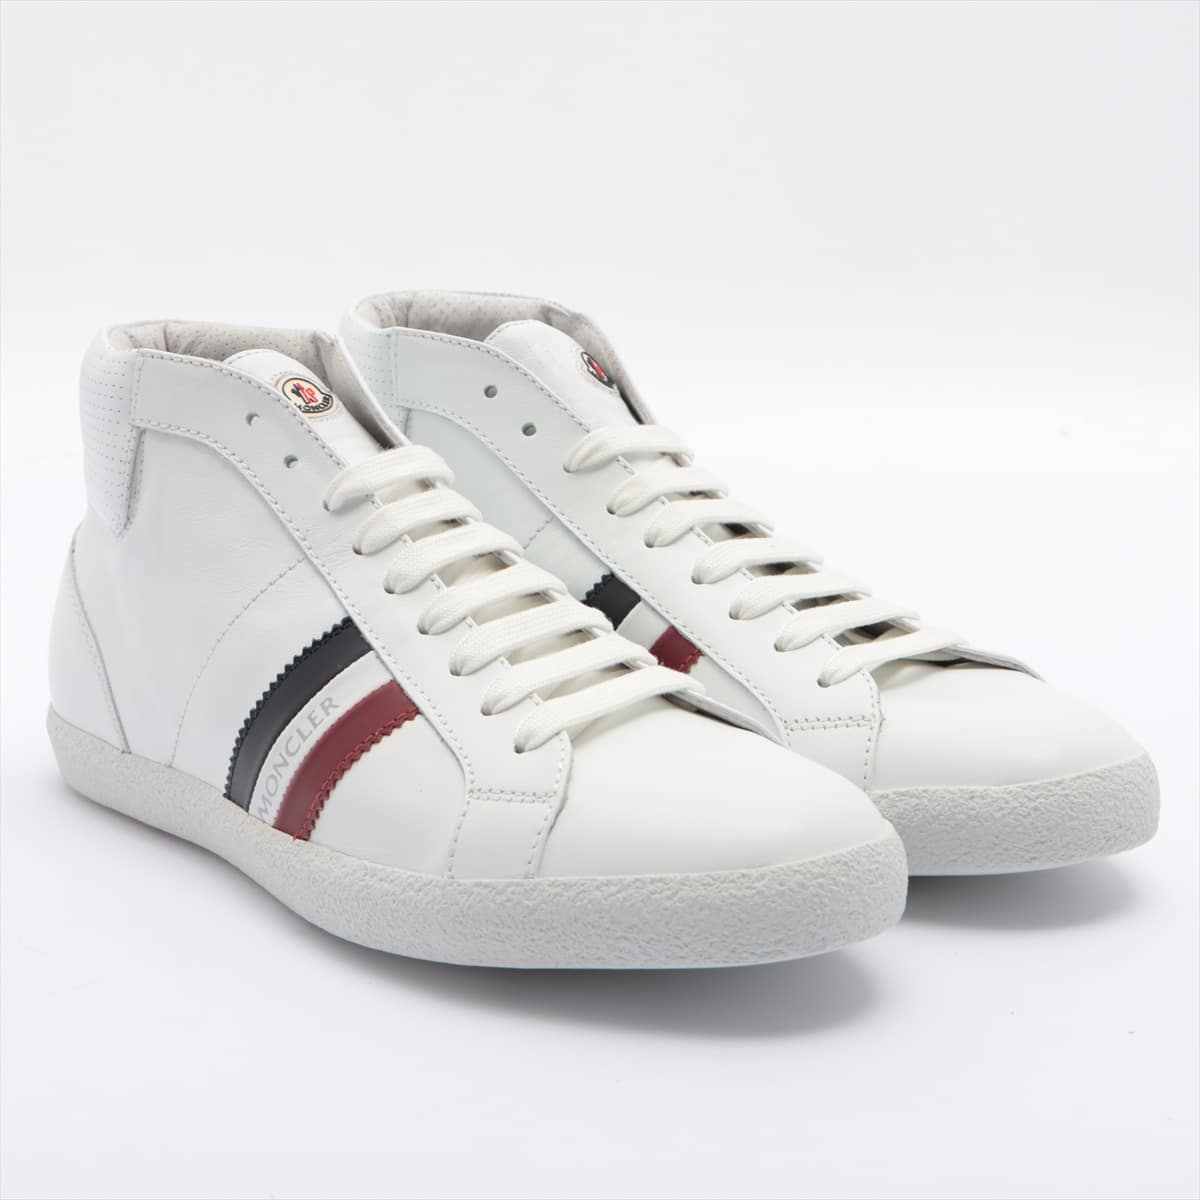 Moncler Leather High-top Sneakers 41 Men's White